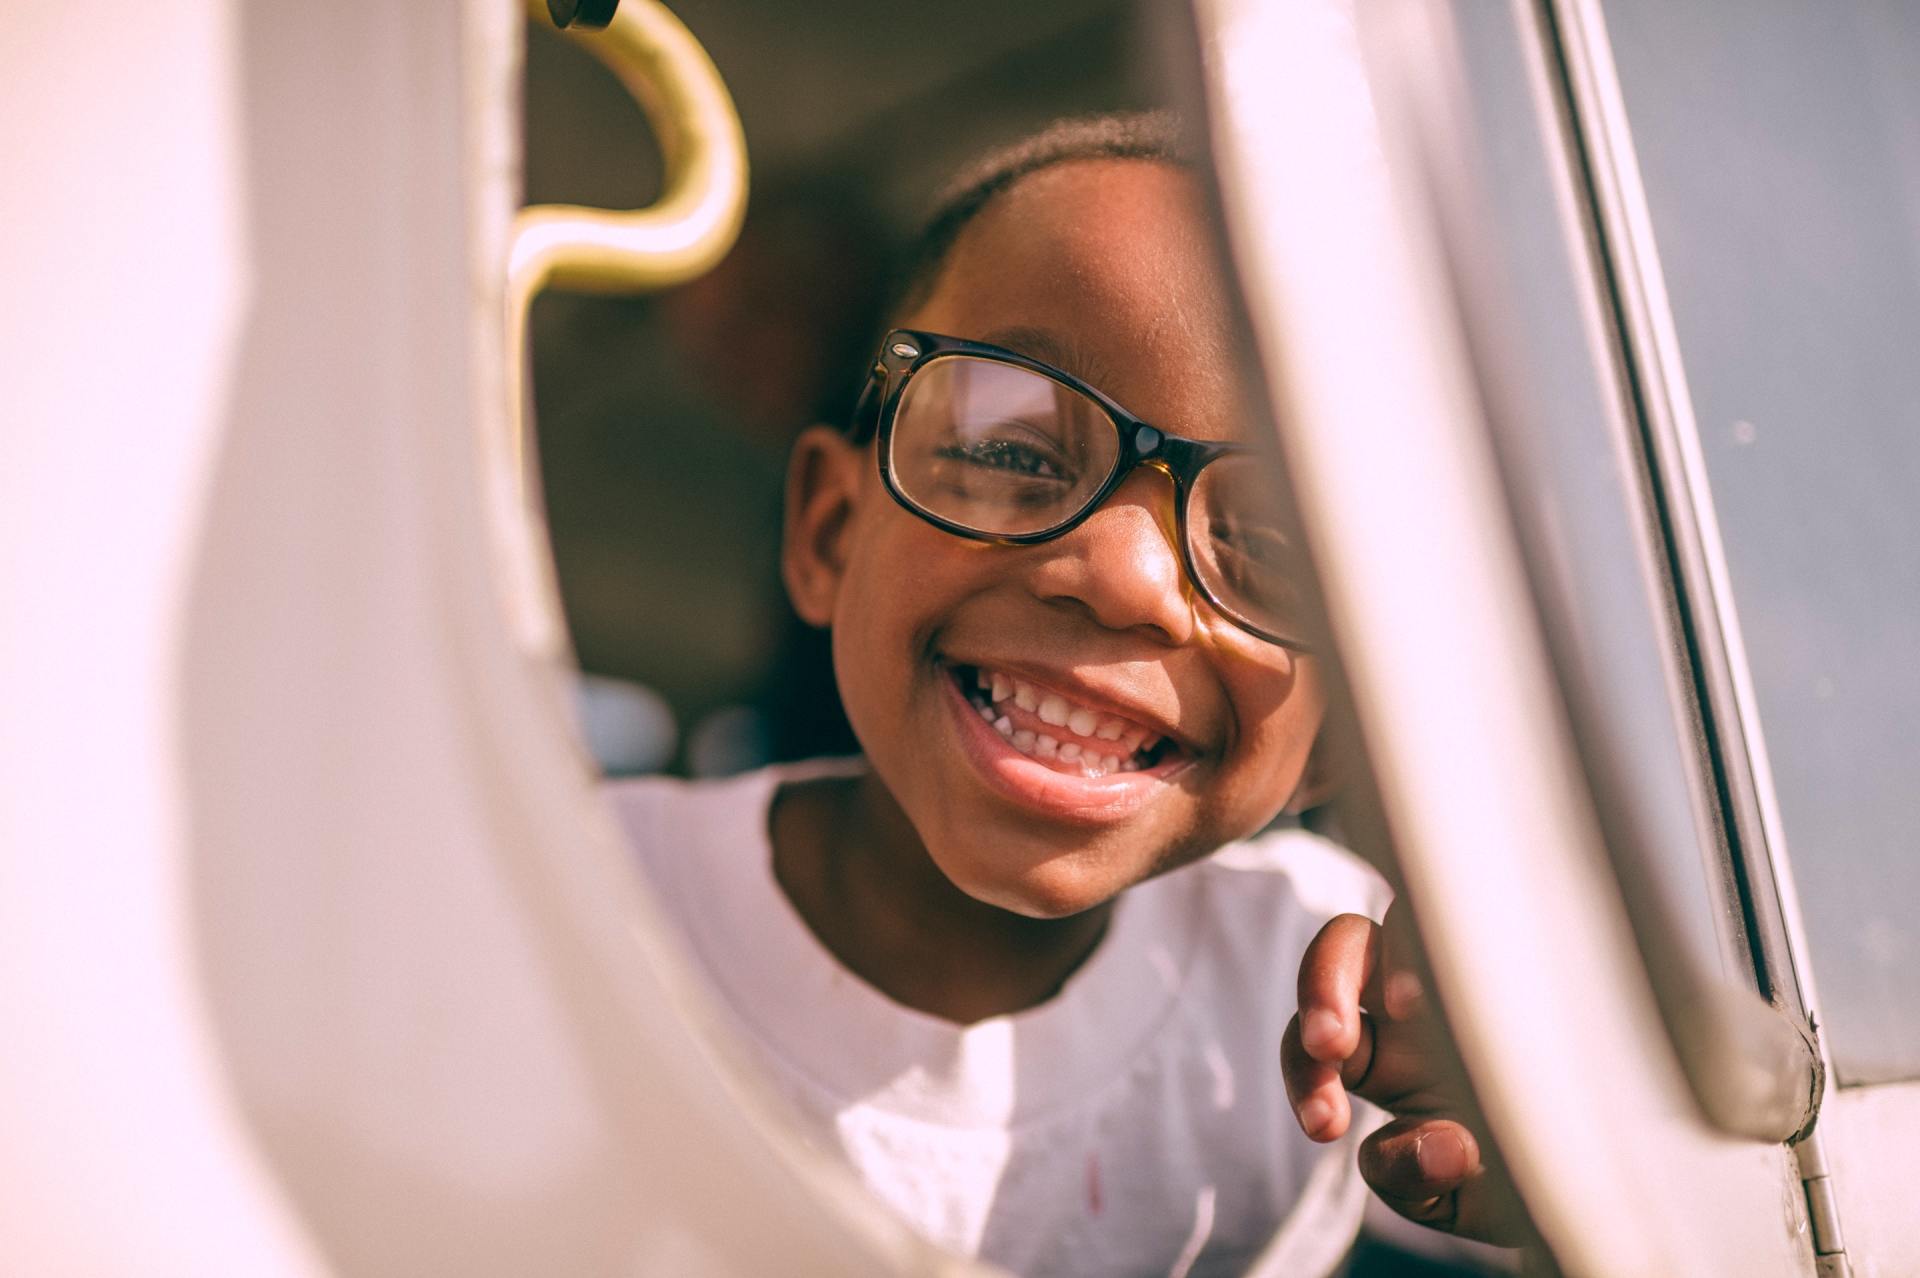 A young girl wearing glasses is smiling while sitting in a car.